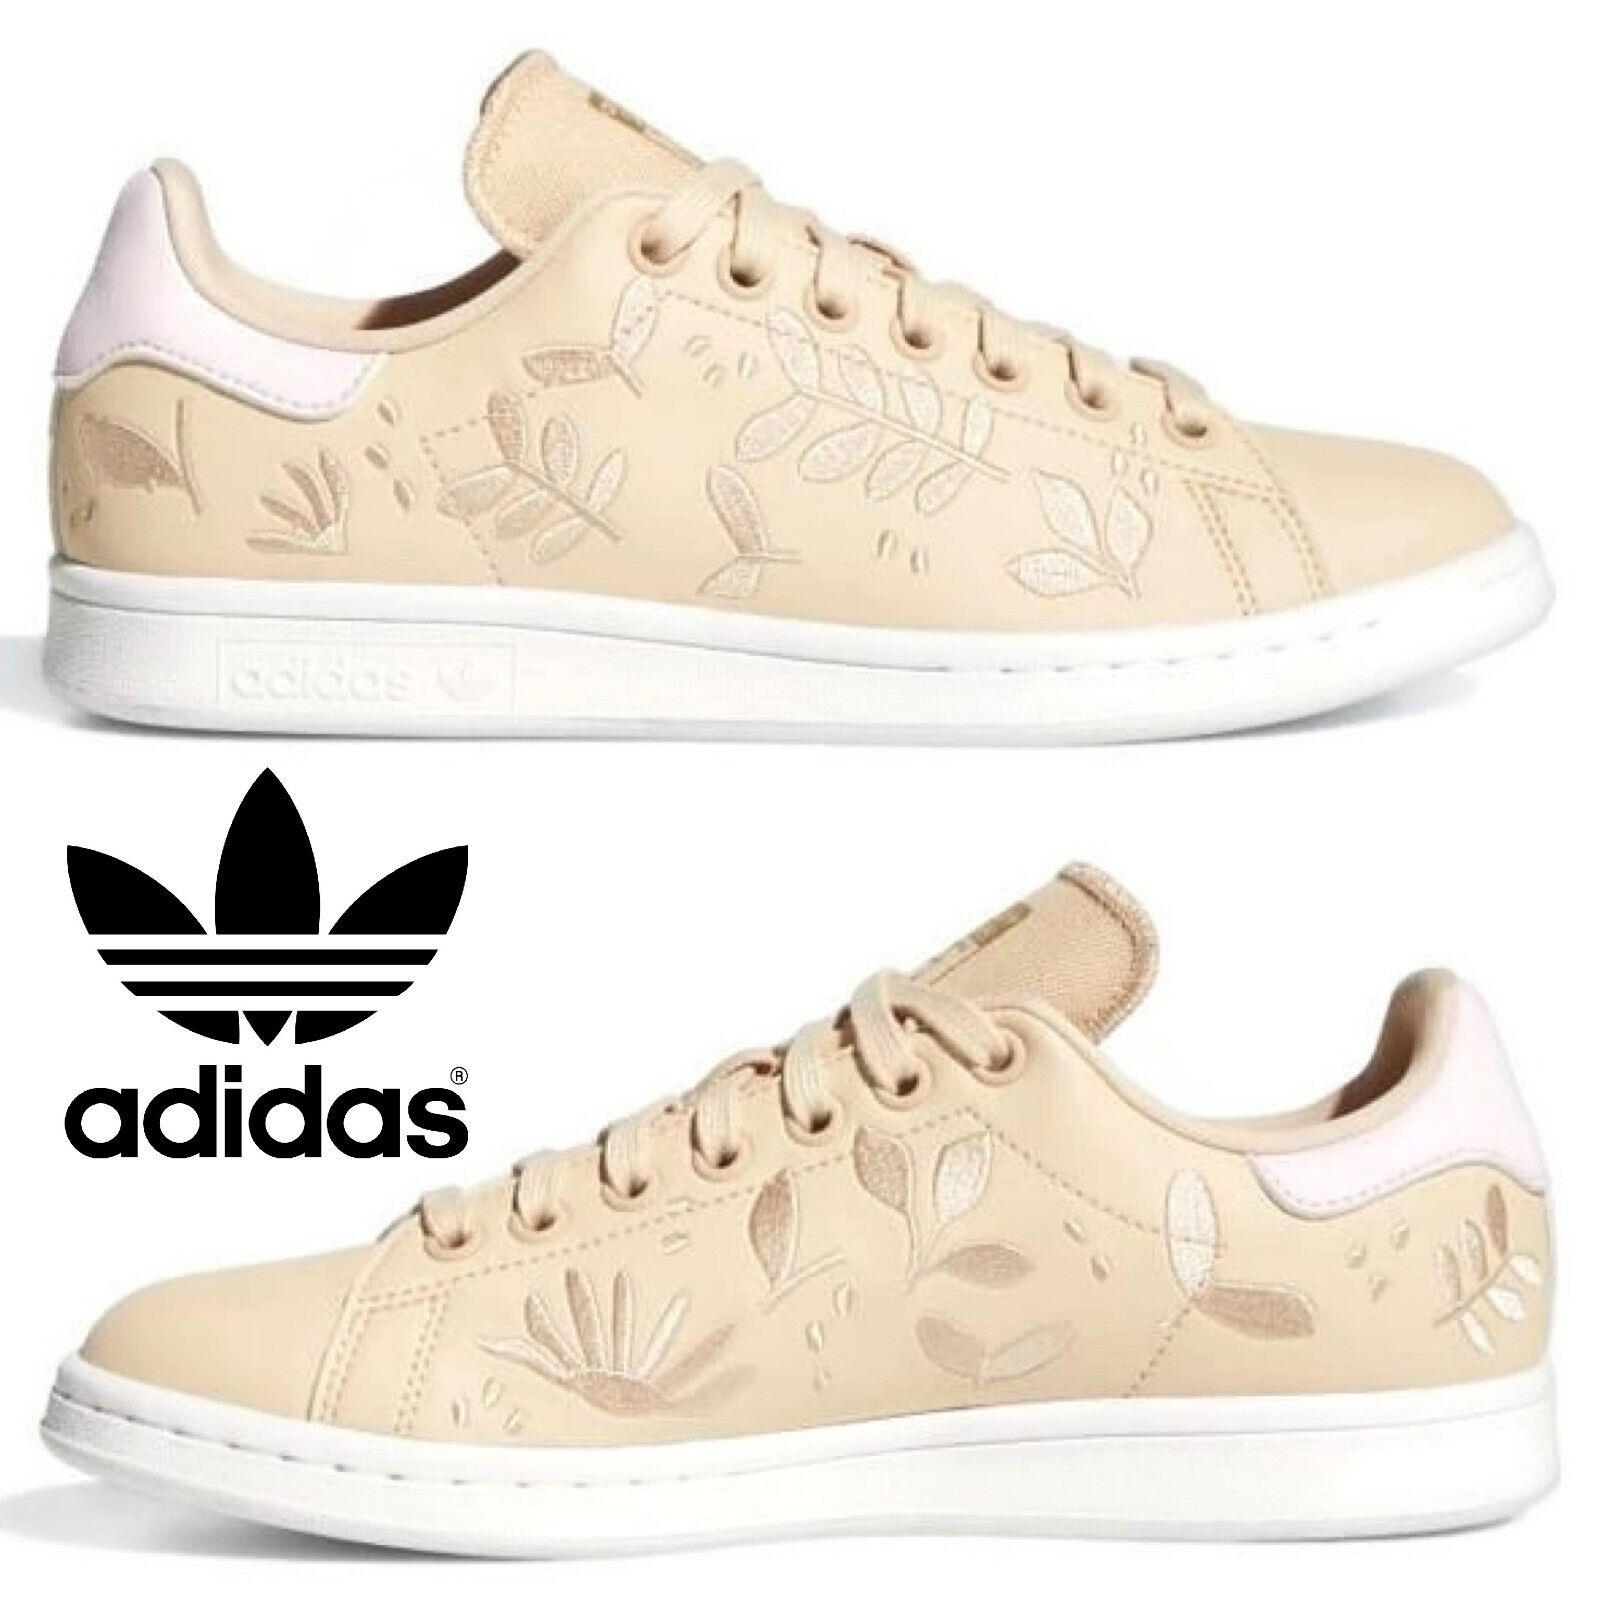 Adidas Originals Stan Smith Women s Sneakers Casual Shoes Sport Gym Halo Blush - Pink , Halo Blush / Clear Pink / Cloud White Manufacturer